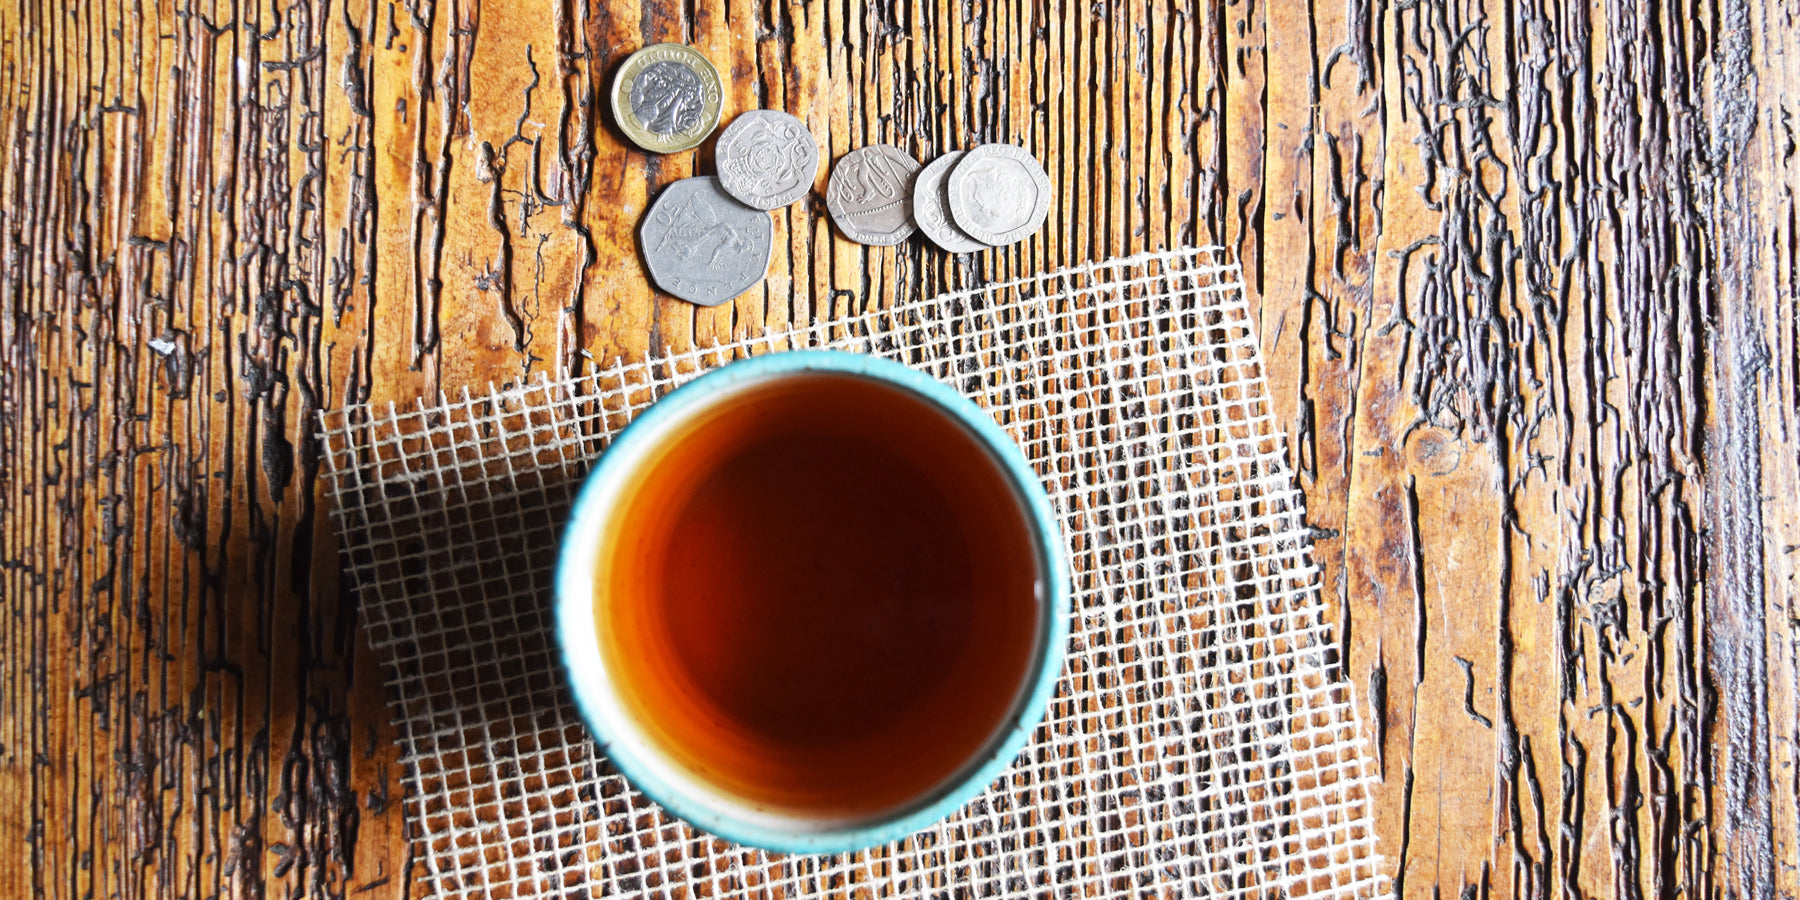 a cup of tea on a wooden table with some pennies beside it